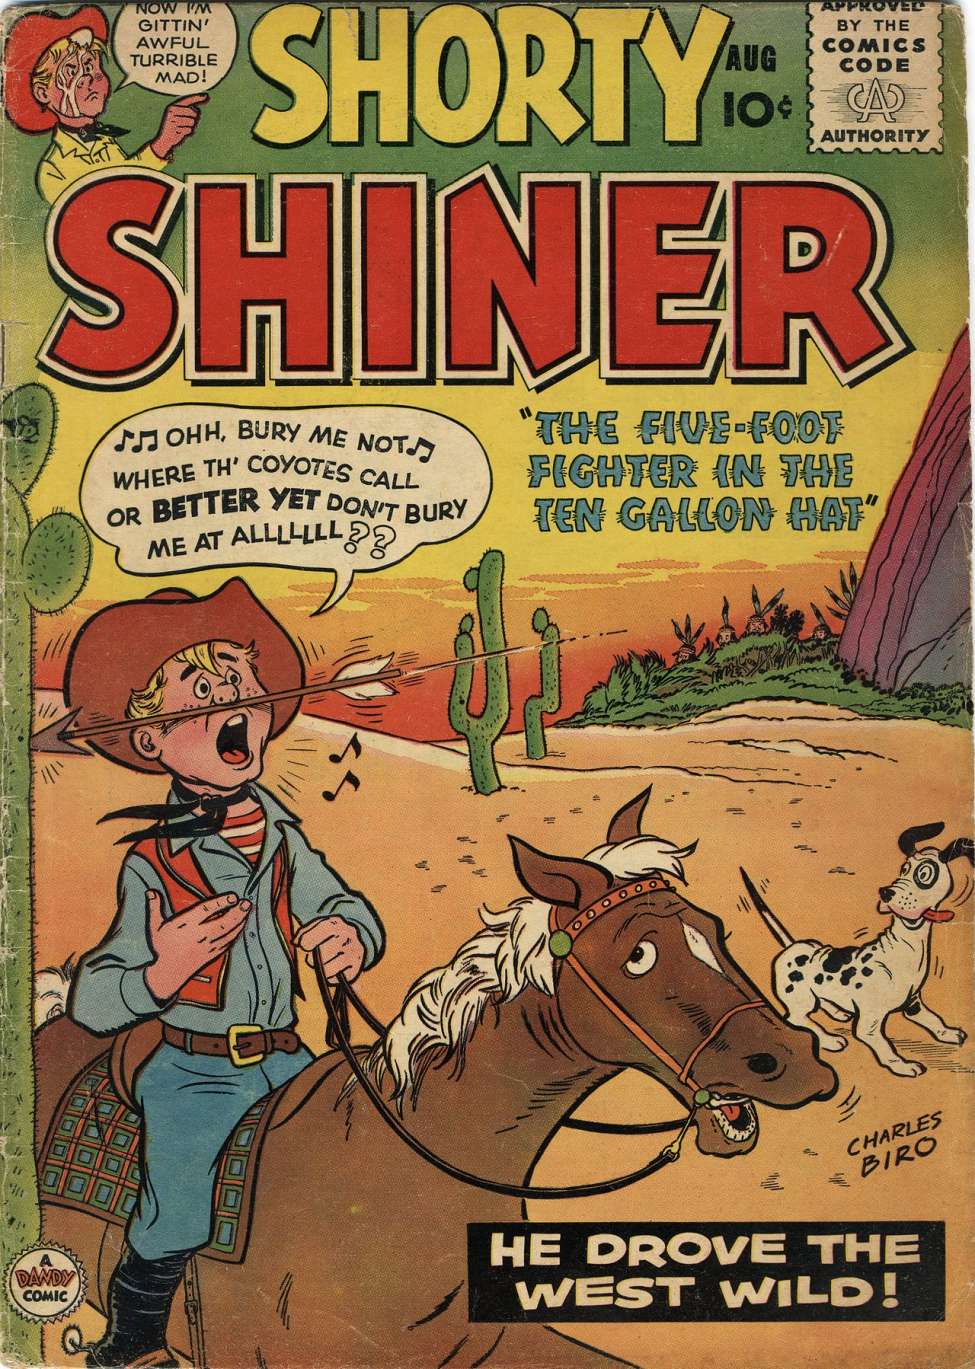 Book Cover For Shorty Shiner 2